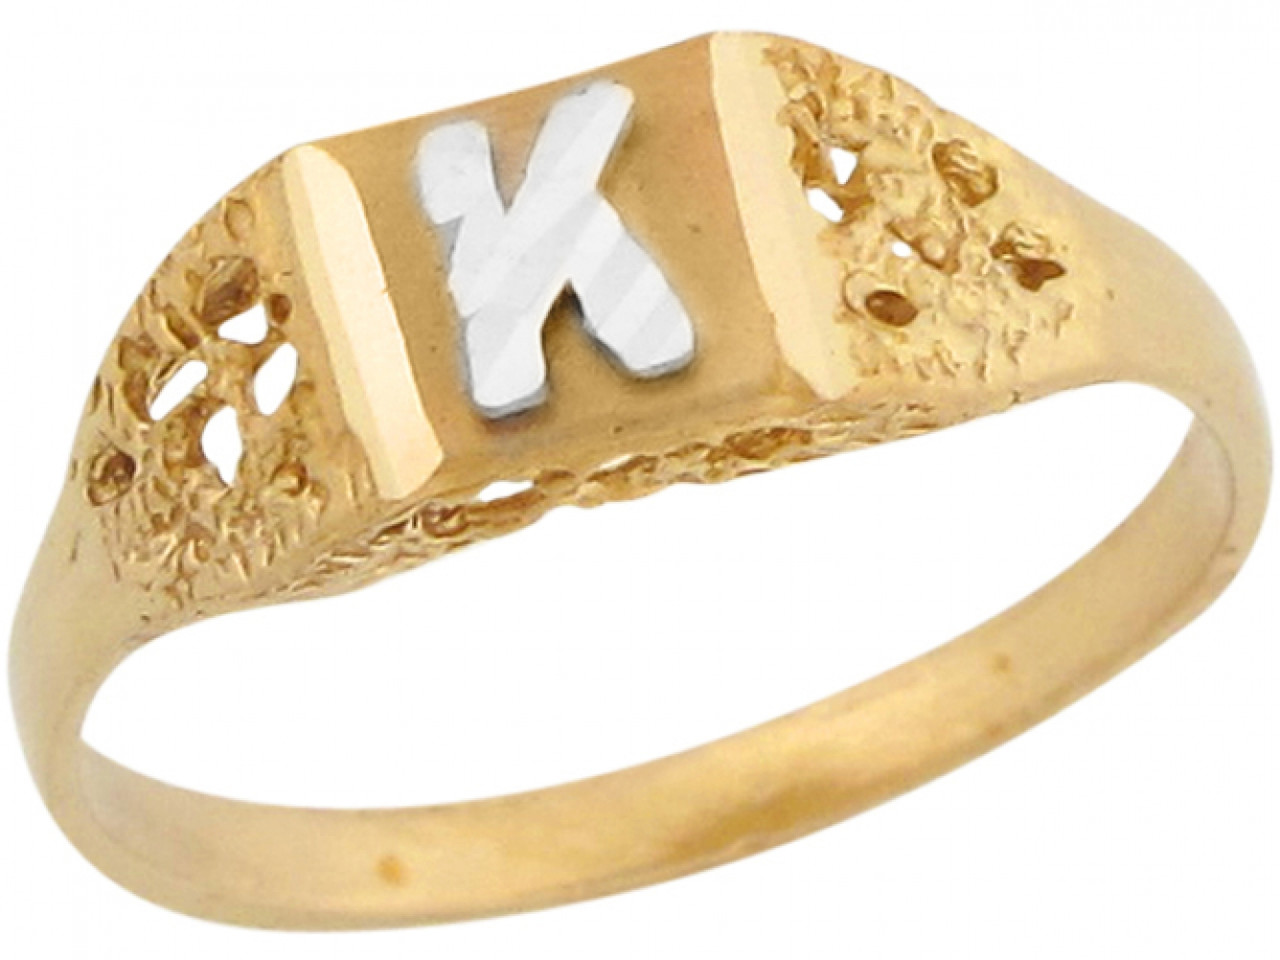 Eriness X Des Kohan Single Initial Ring – Eriness Jewelry